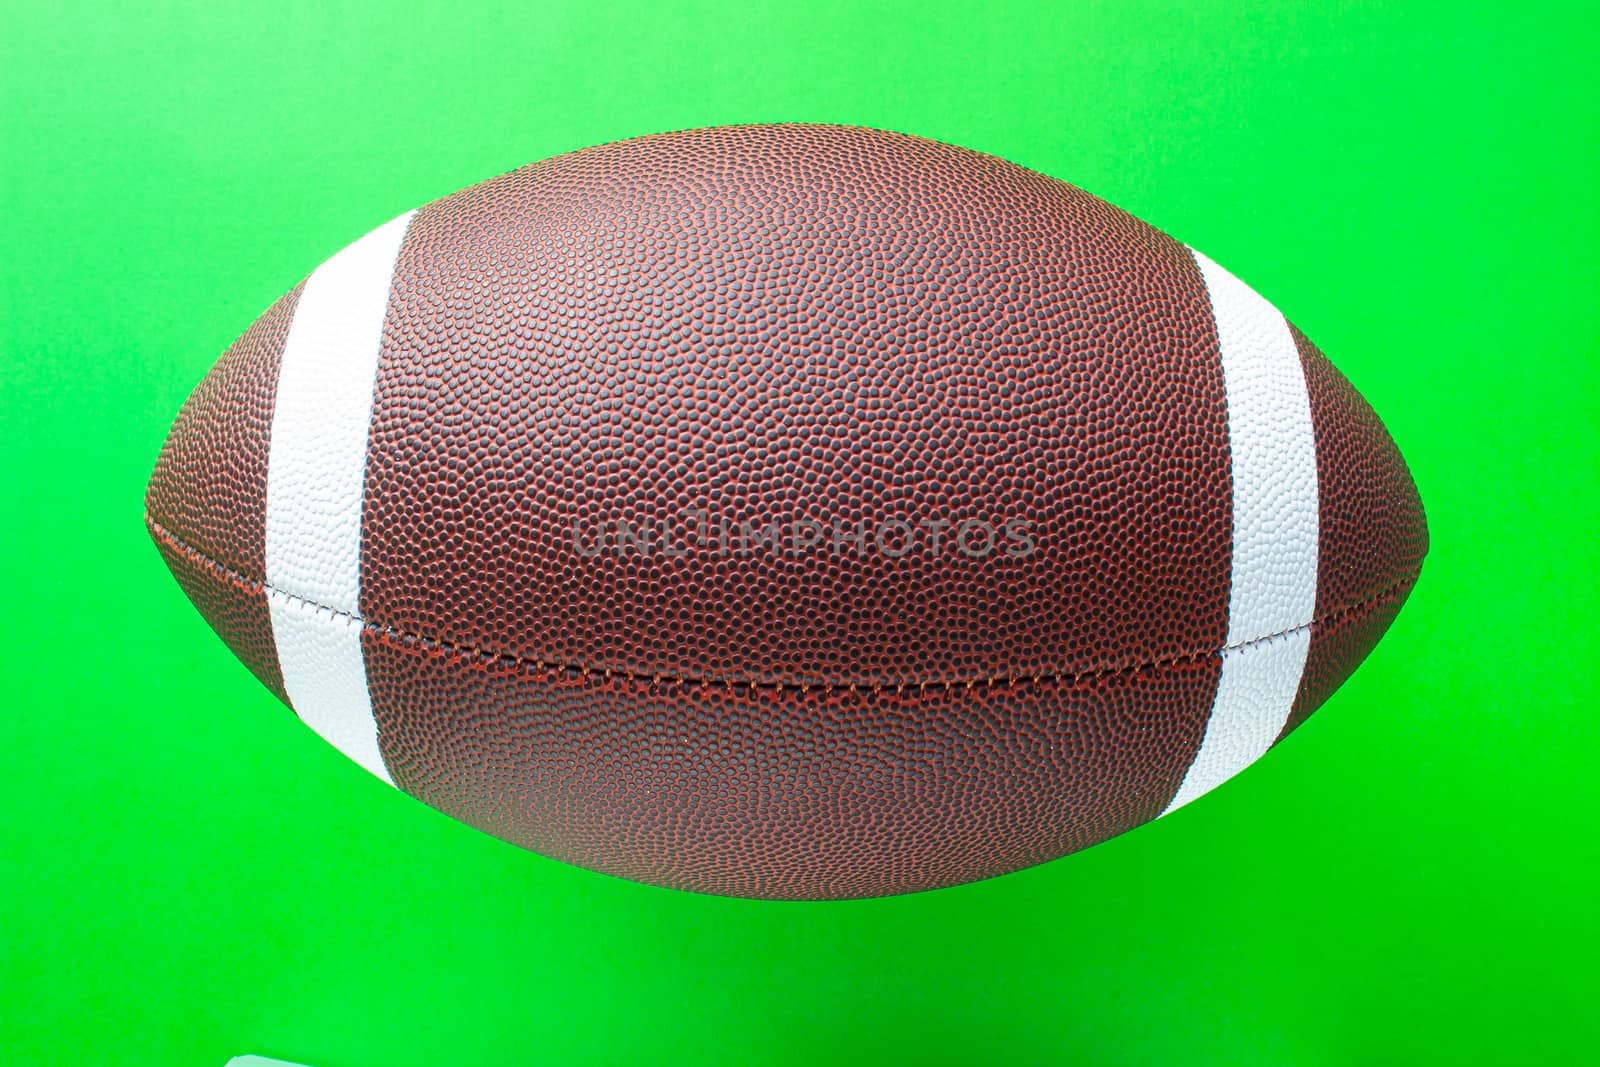 A football on a green background by oasisamuel